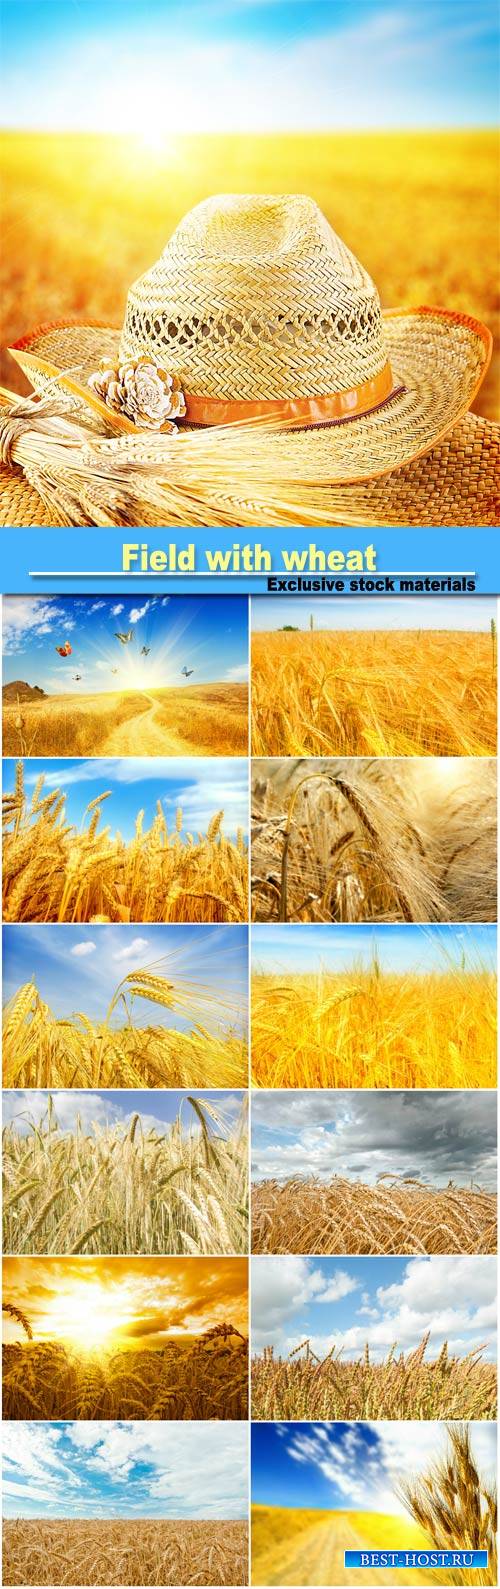 Field with wheat background with spikelets of wheat